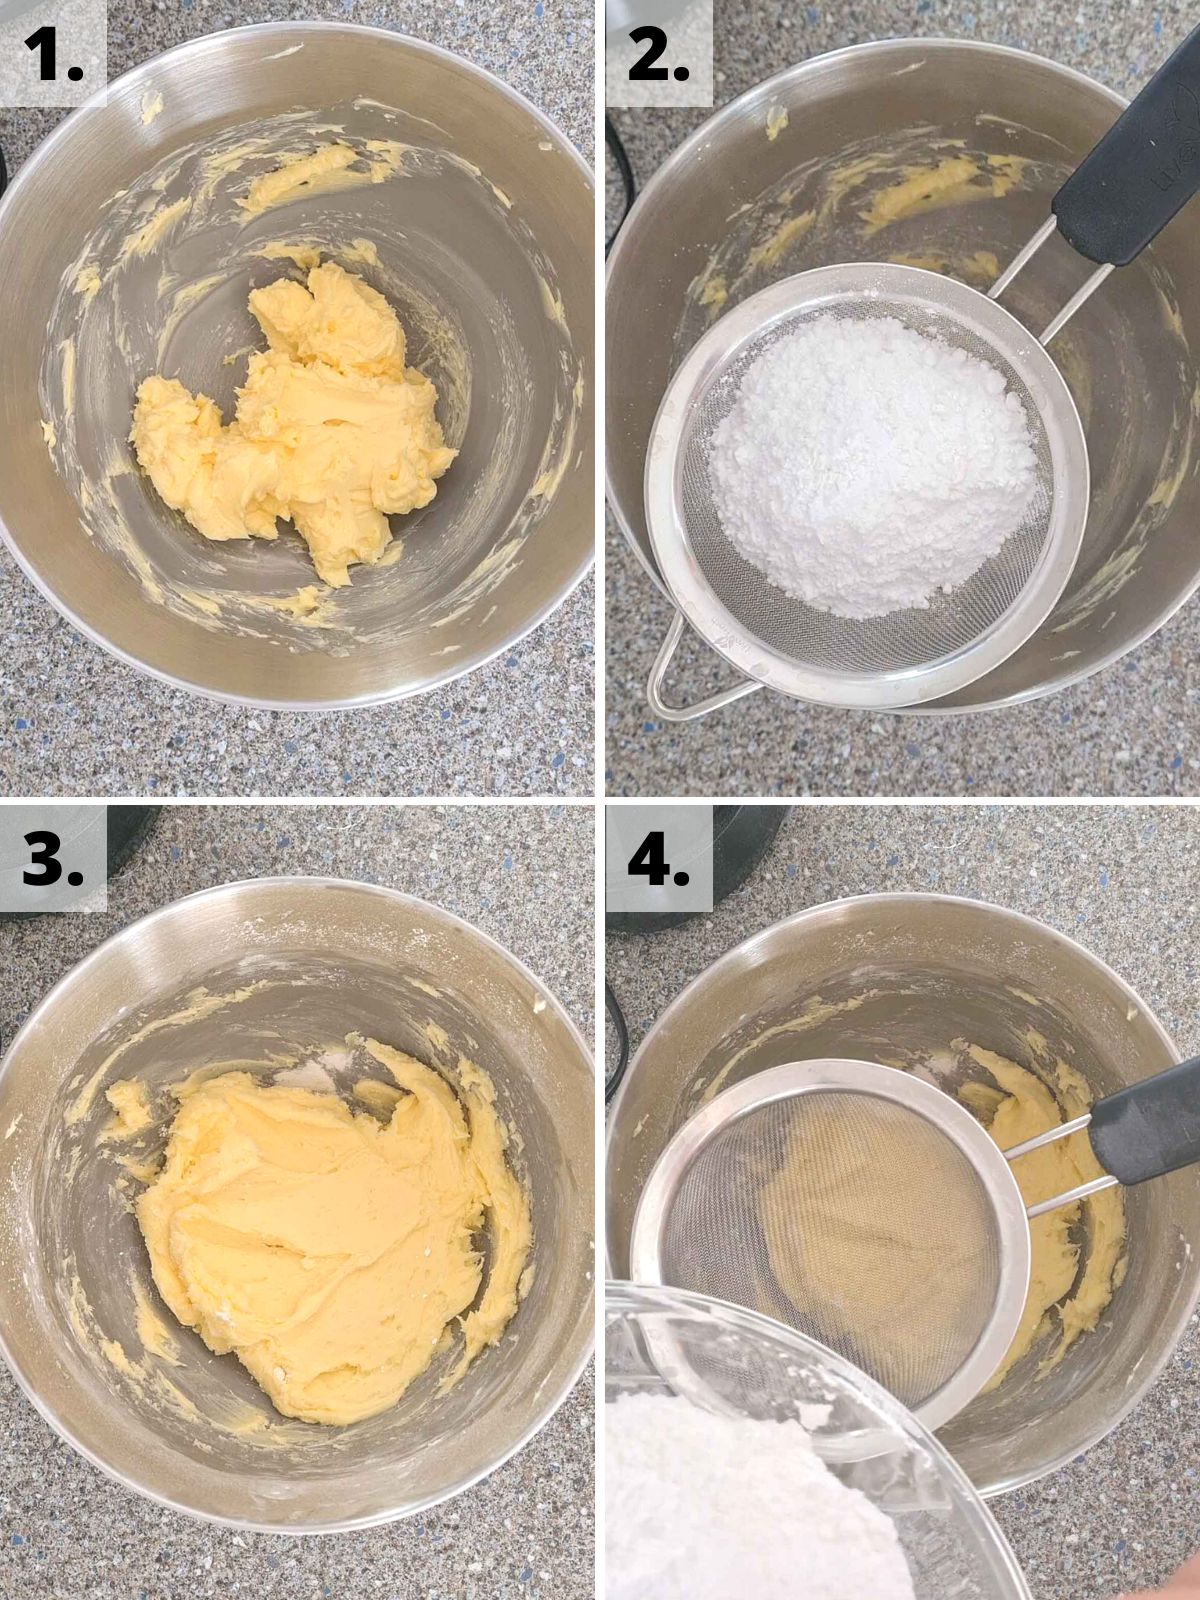 steps 1 to 4 for how to make buttercream recipe.